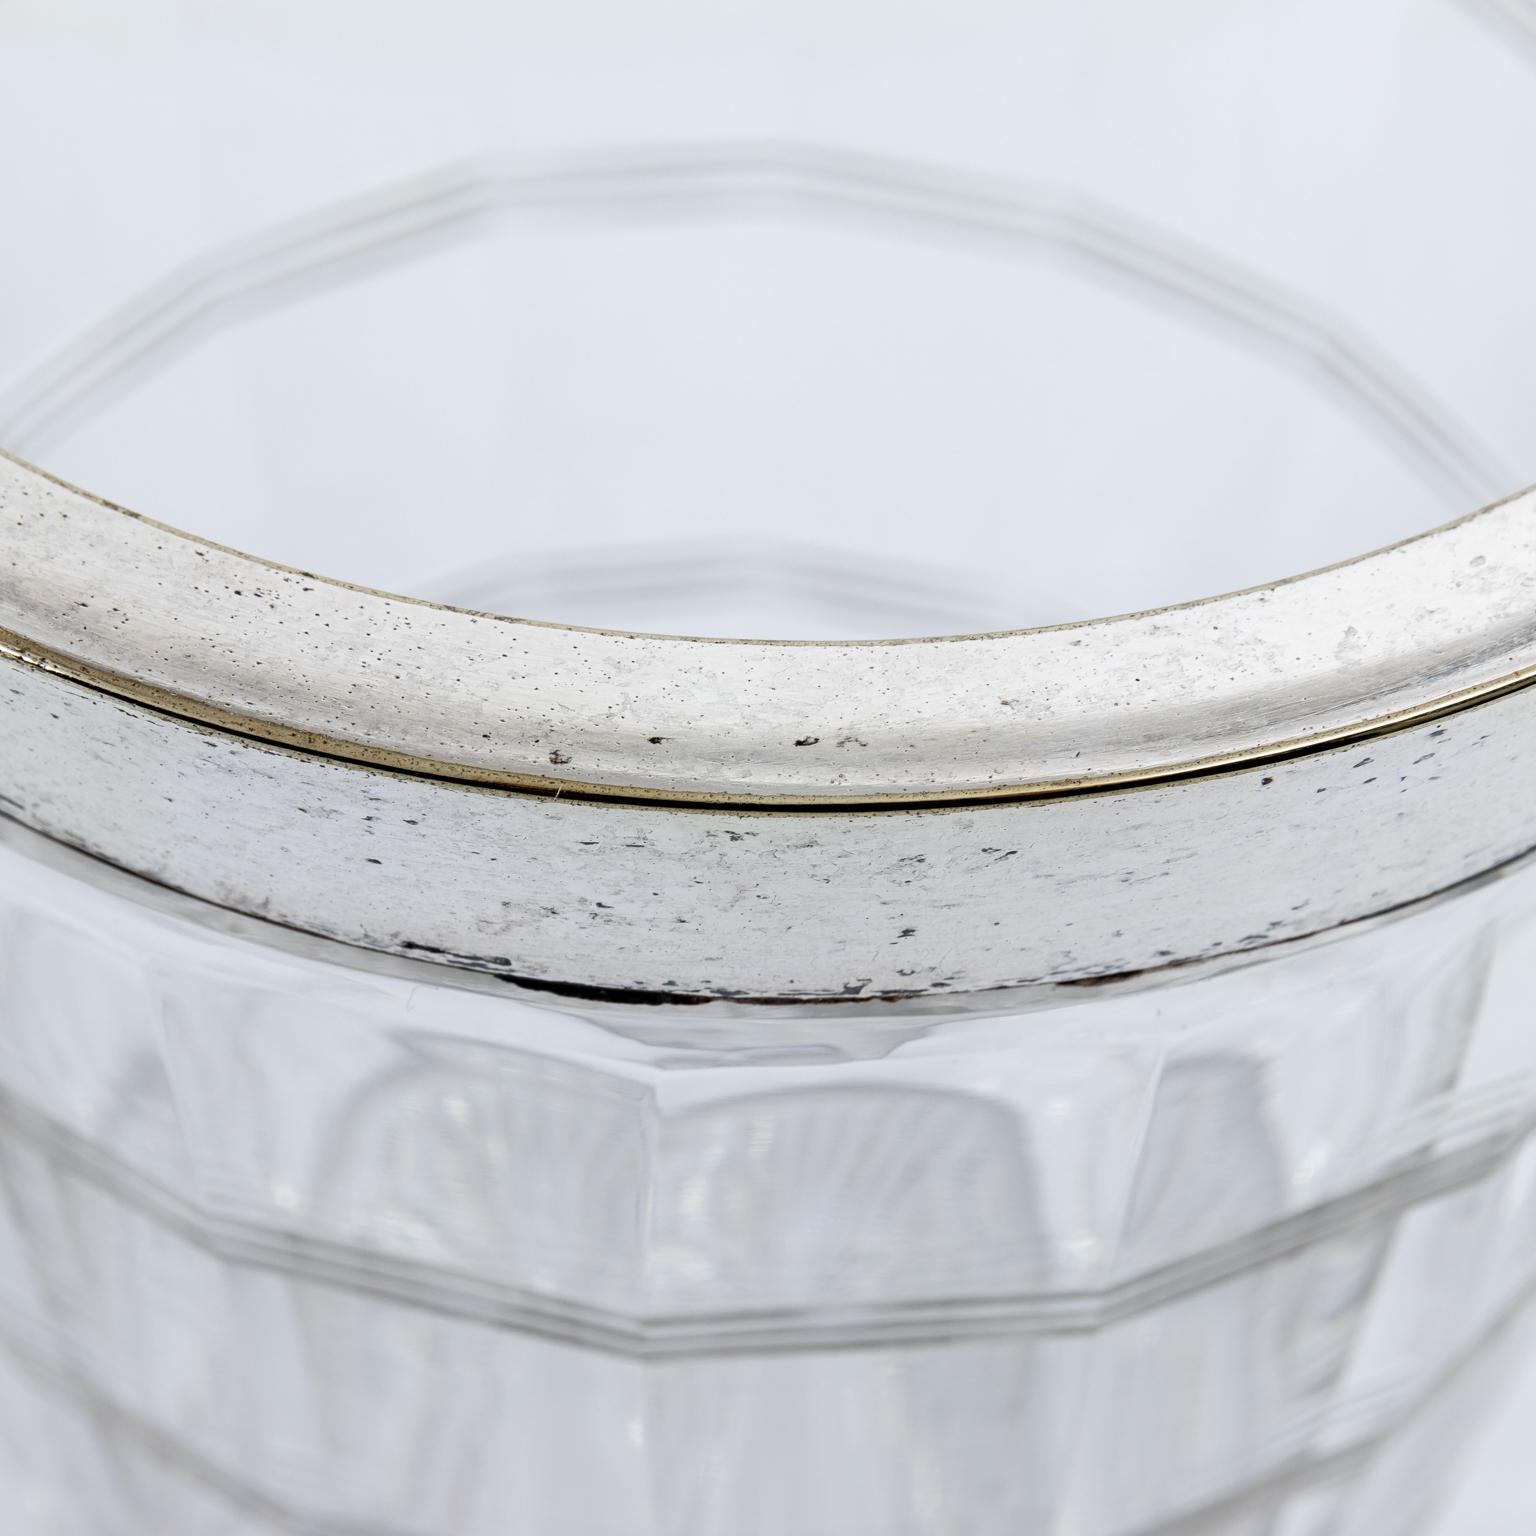 English glass ice pail with silver plated rim and handle, circa 1930s. The body of the pail also features ring detail. Please note of wear consistent with age including minor pitting to the metal rim. Made in England.